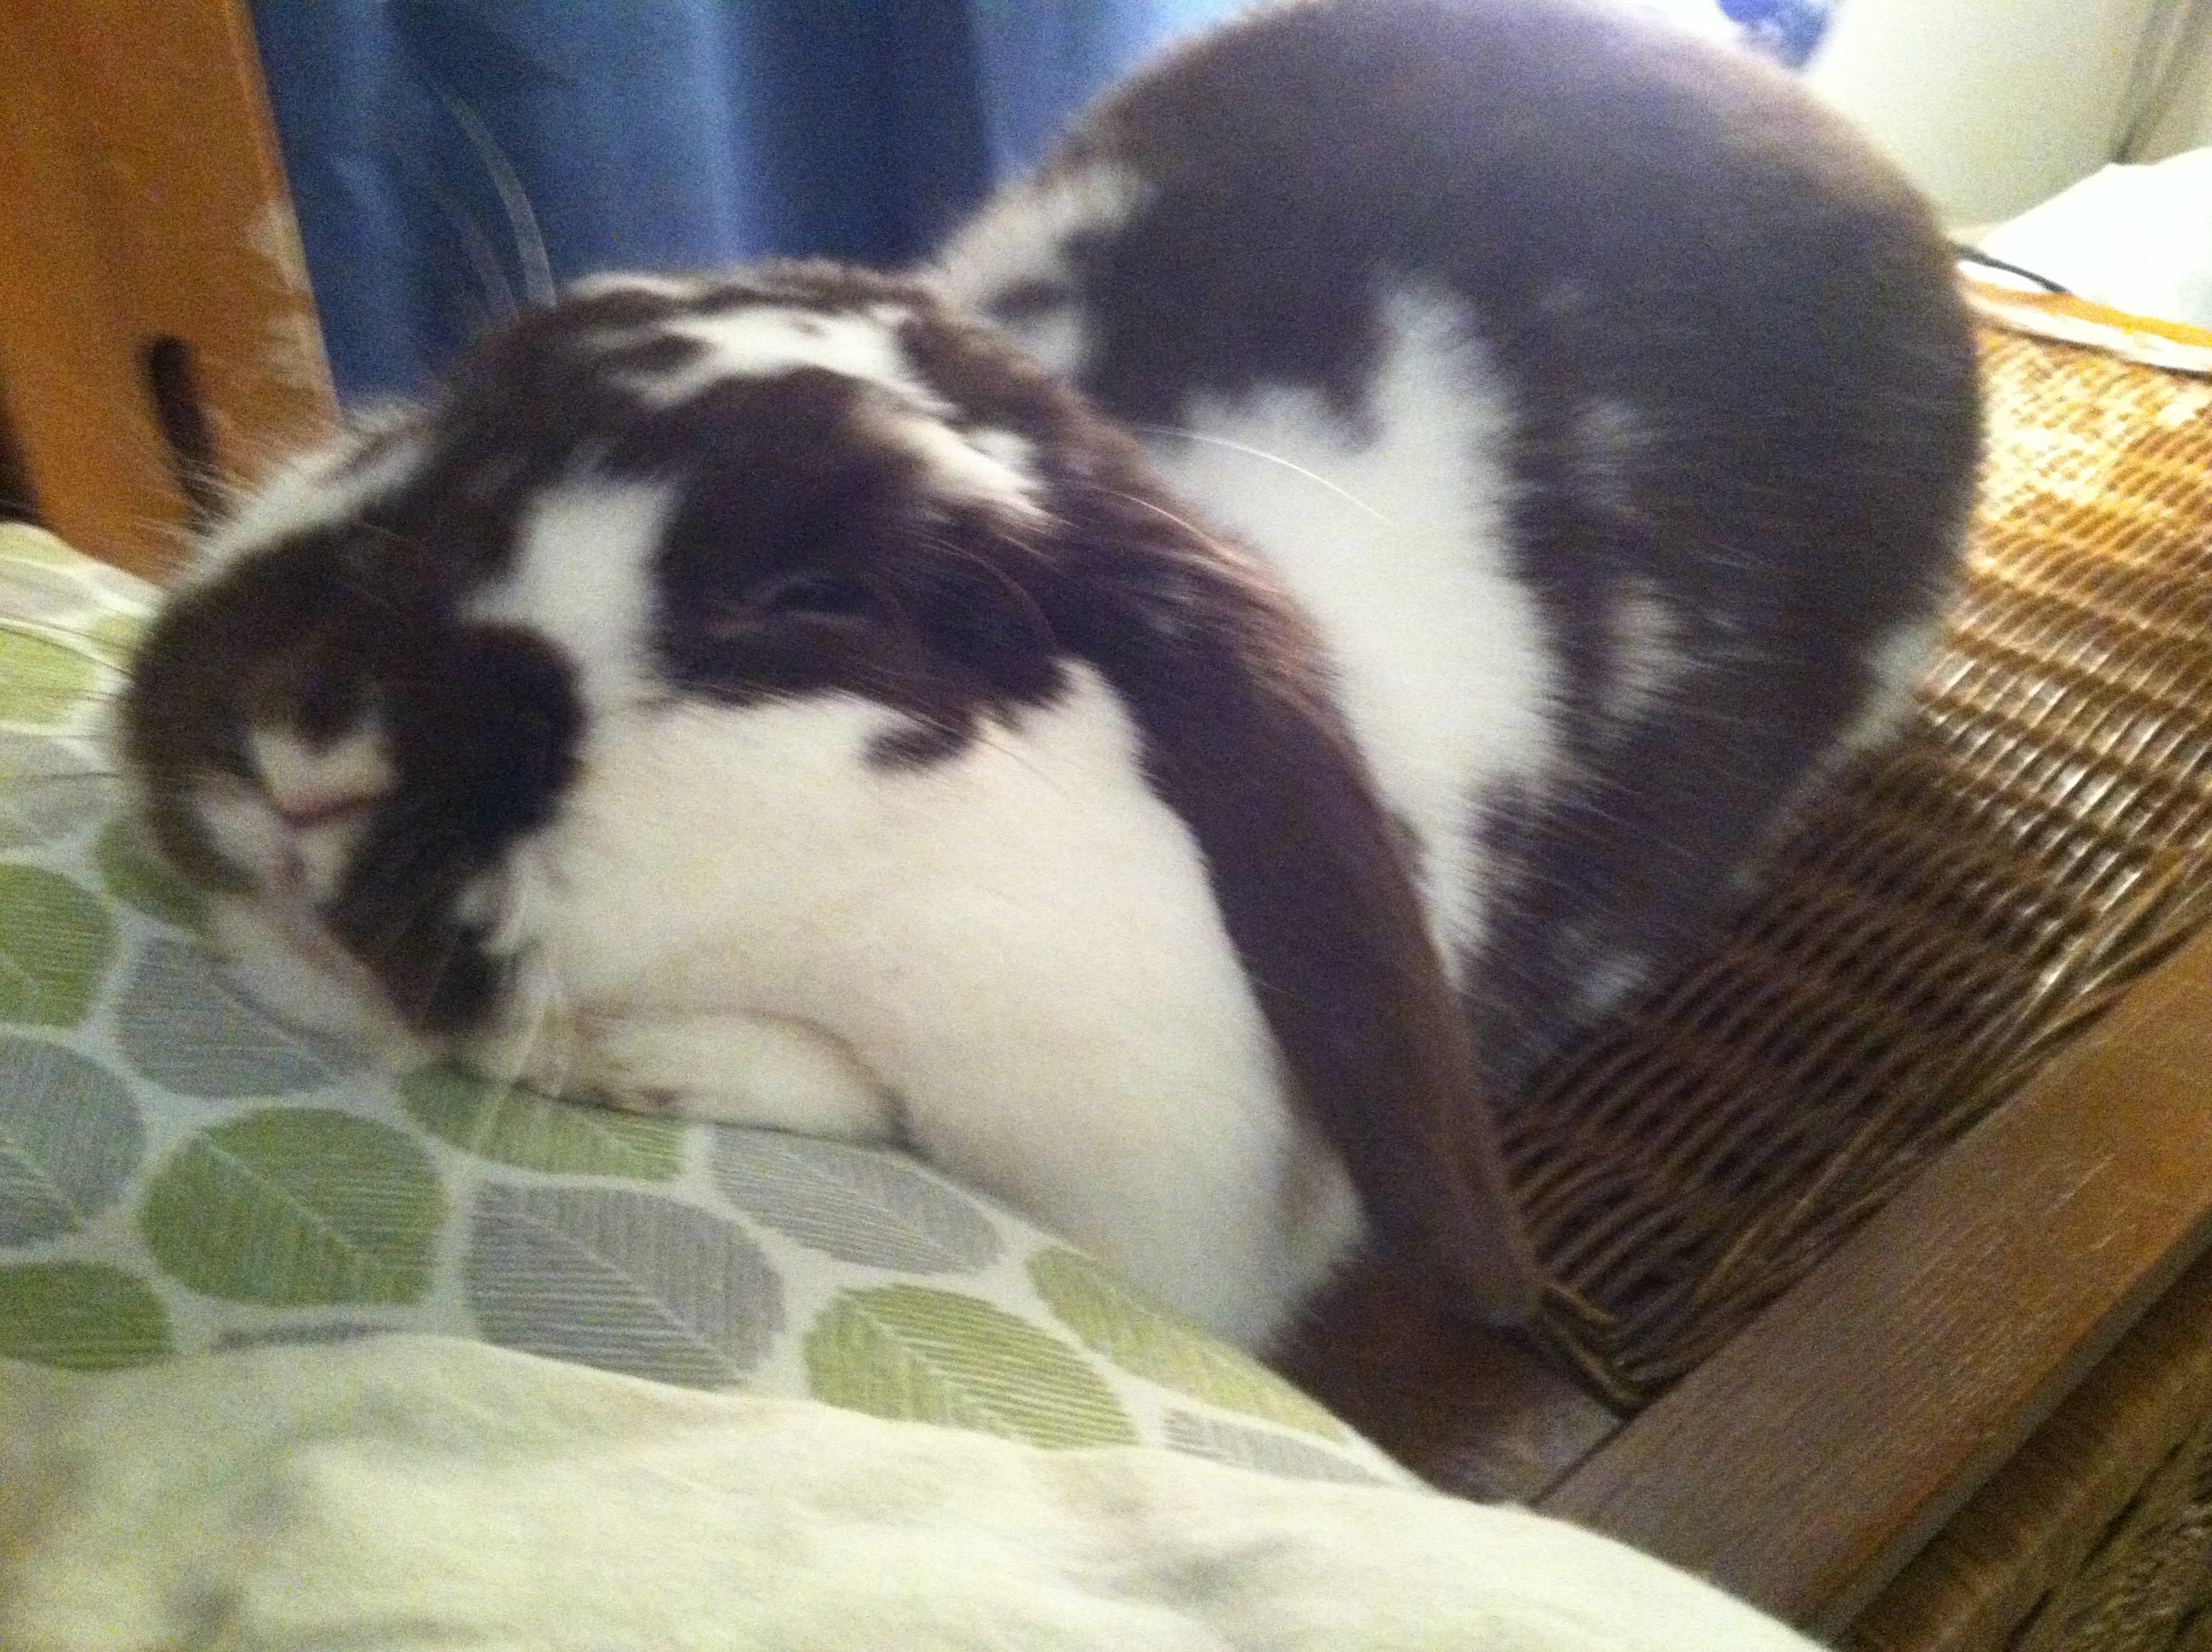 Bunny Can't Decide If She Wants to Be on the Bed or the Table, So She Goes for Both